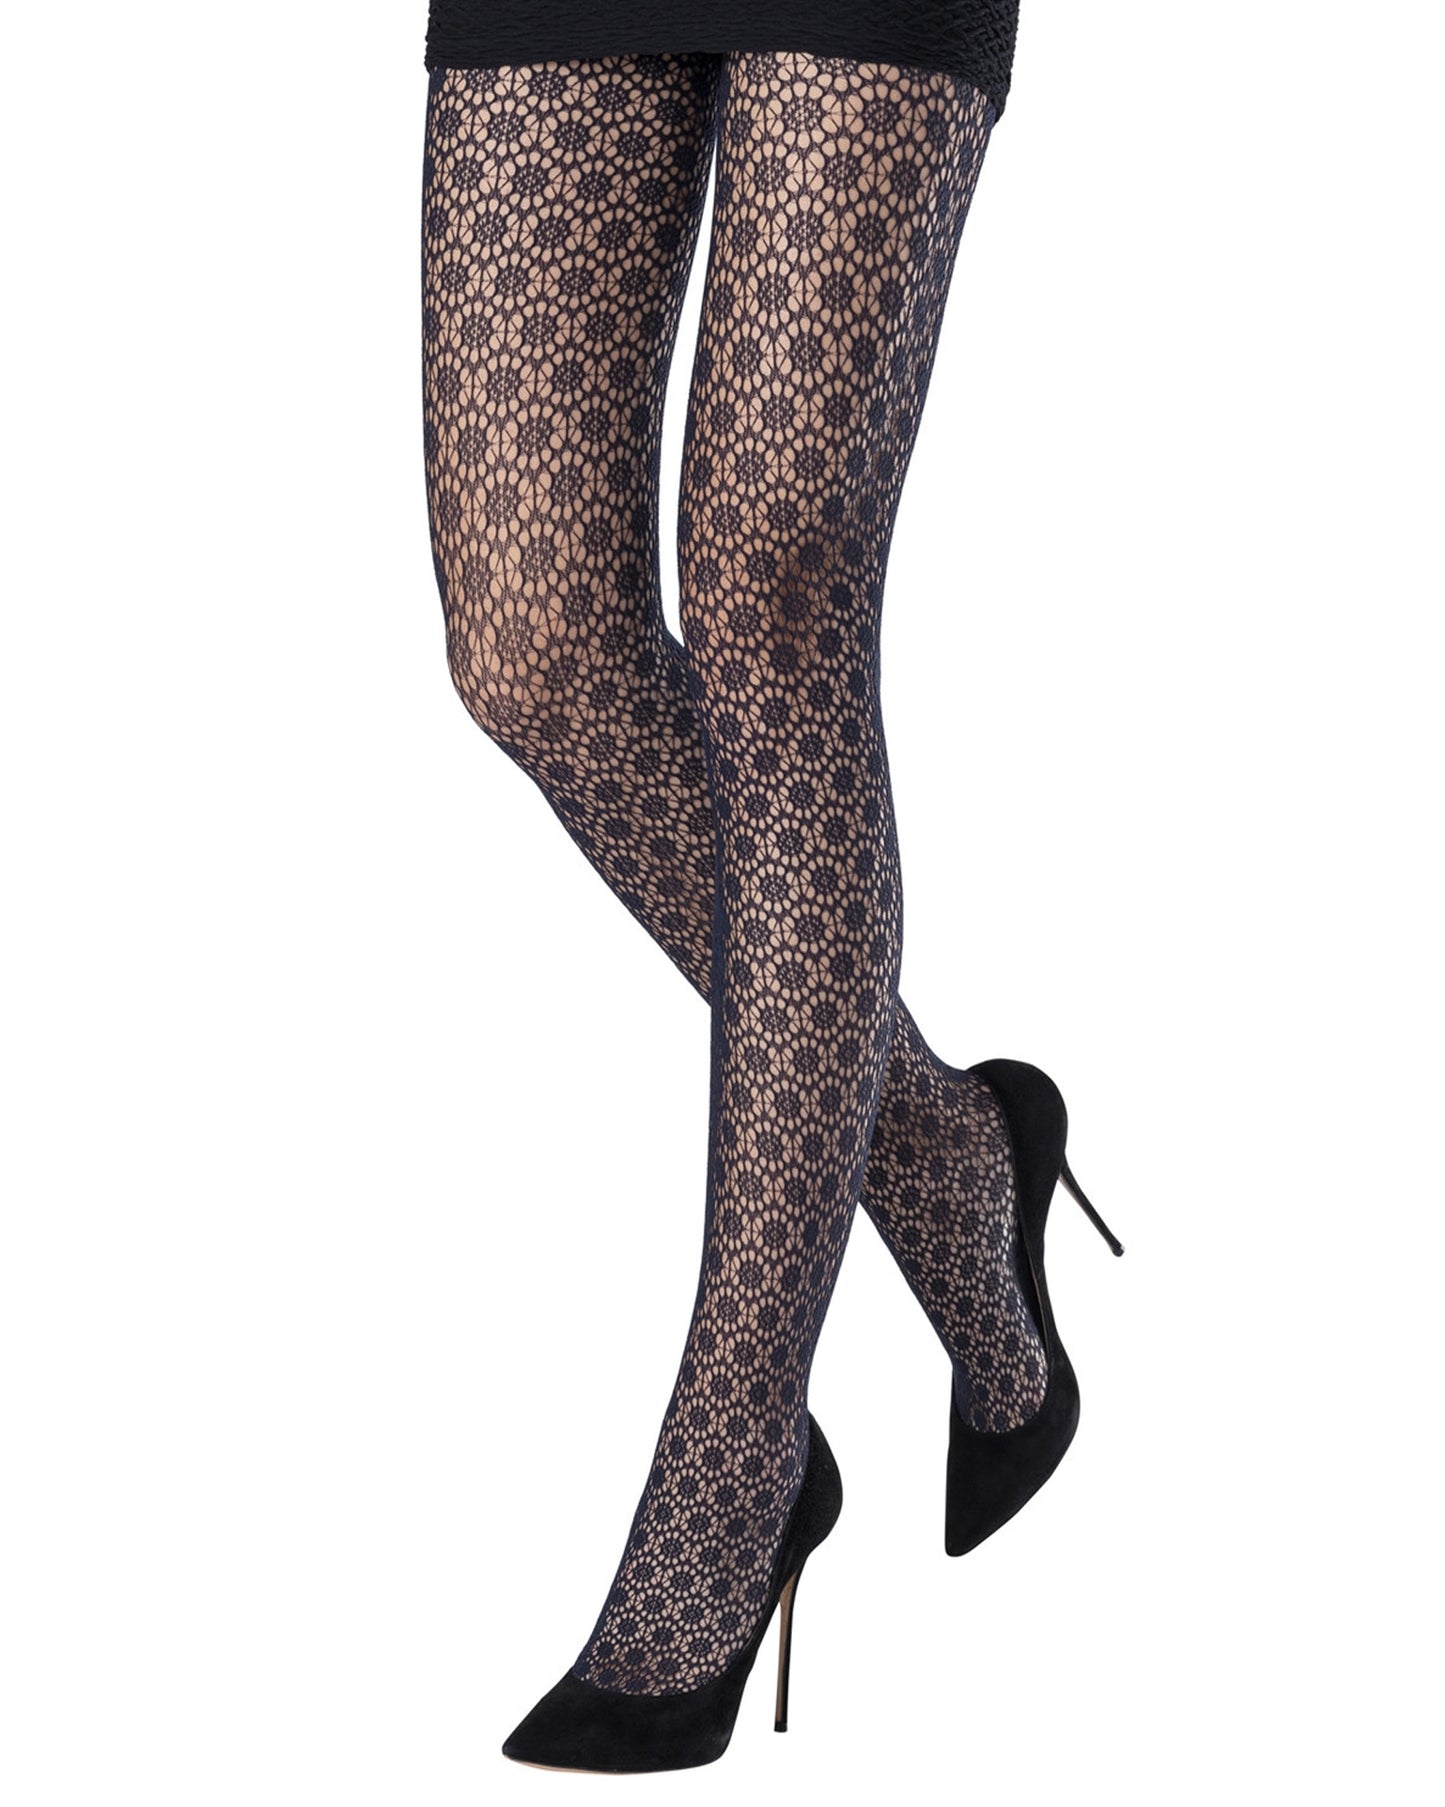 Emilio Cavallini Circle Lace Tights - Black openwork circular crochet style lace tights worn with black court shoe heels and black mini skirt.